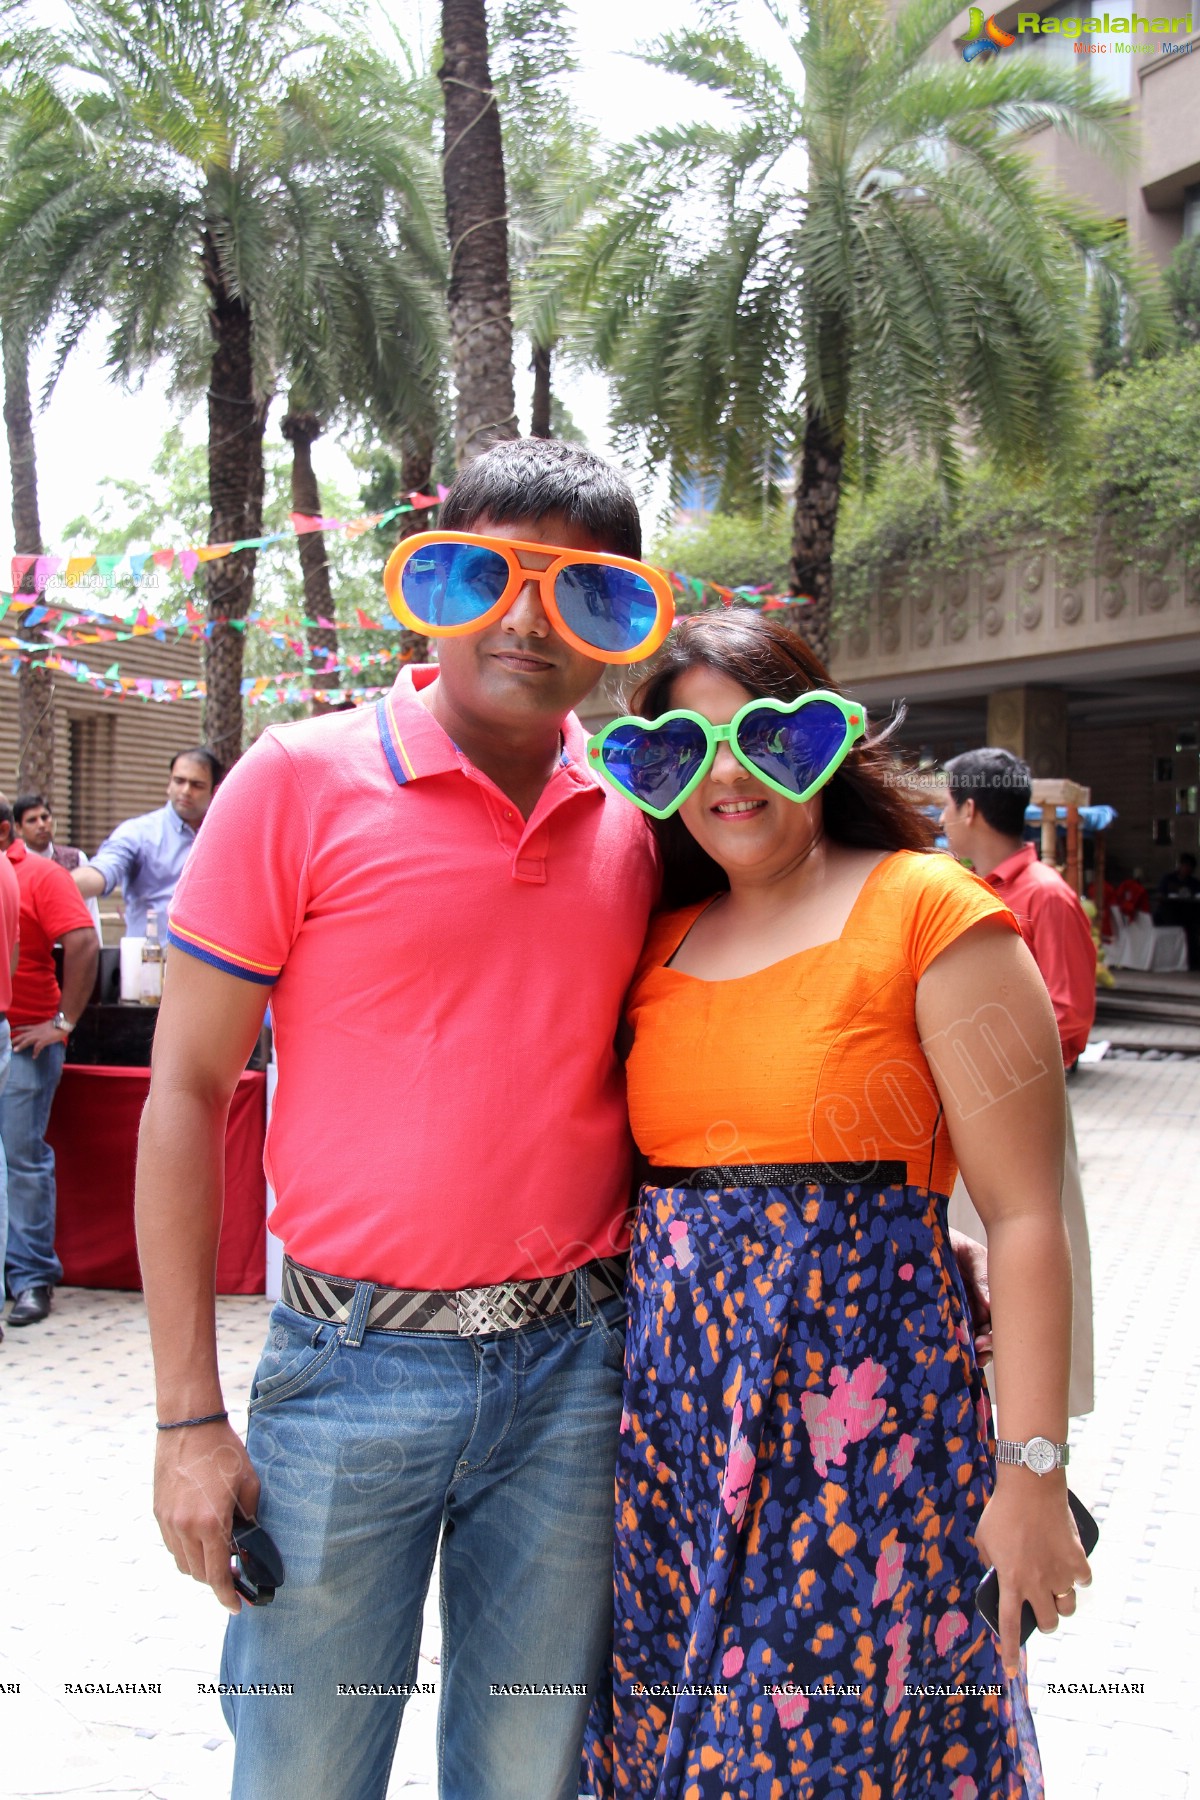 Neon Get Together Theme Brunch Party at Marriott